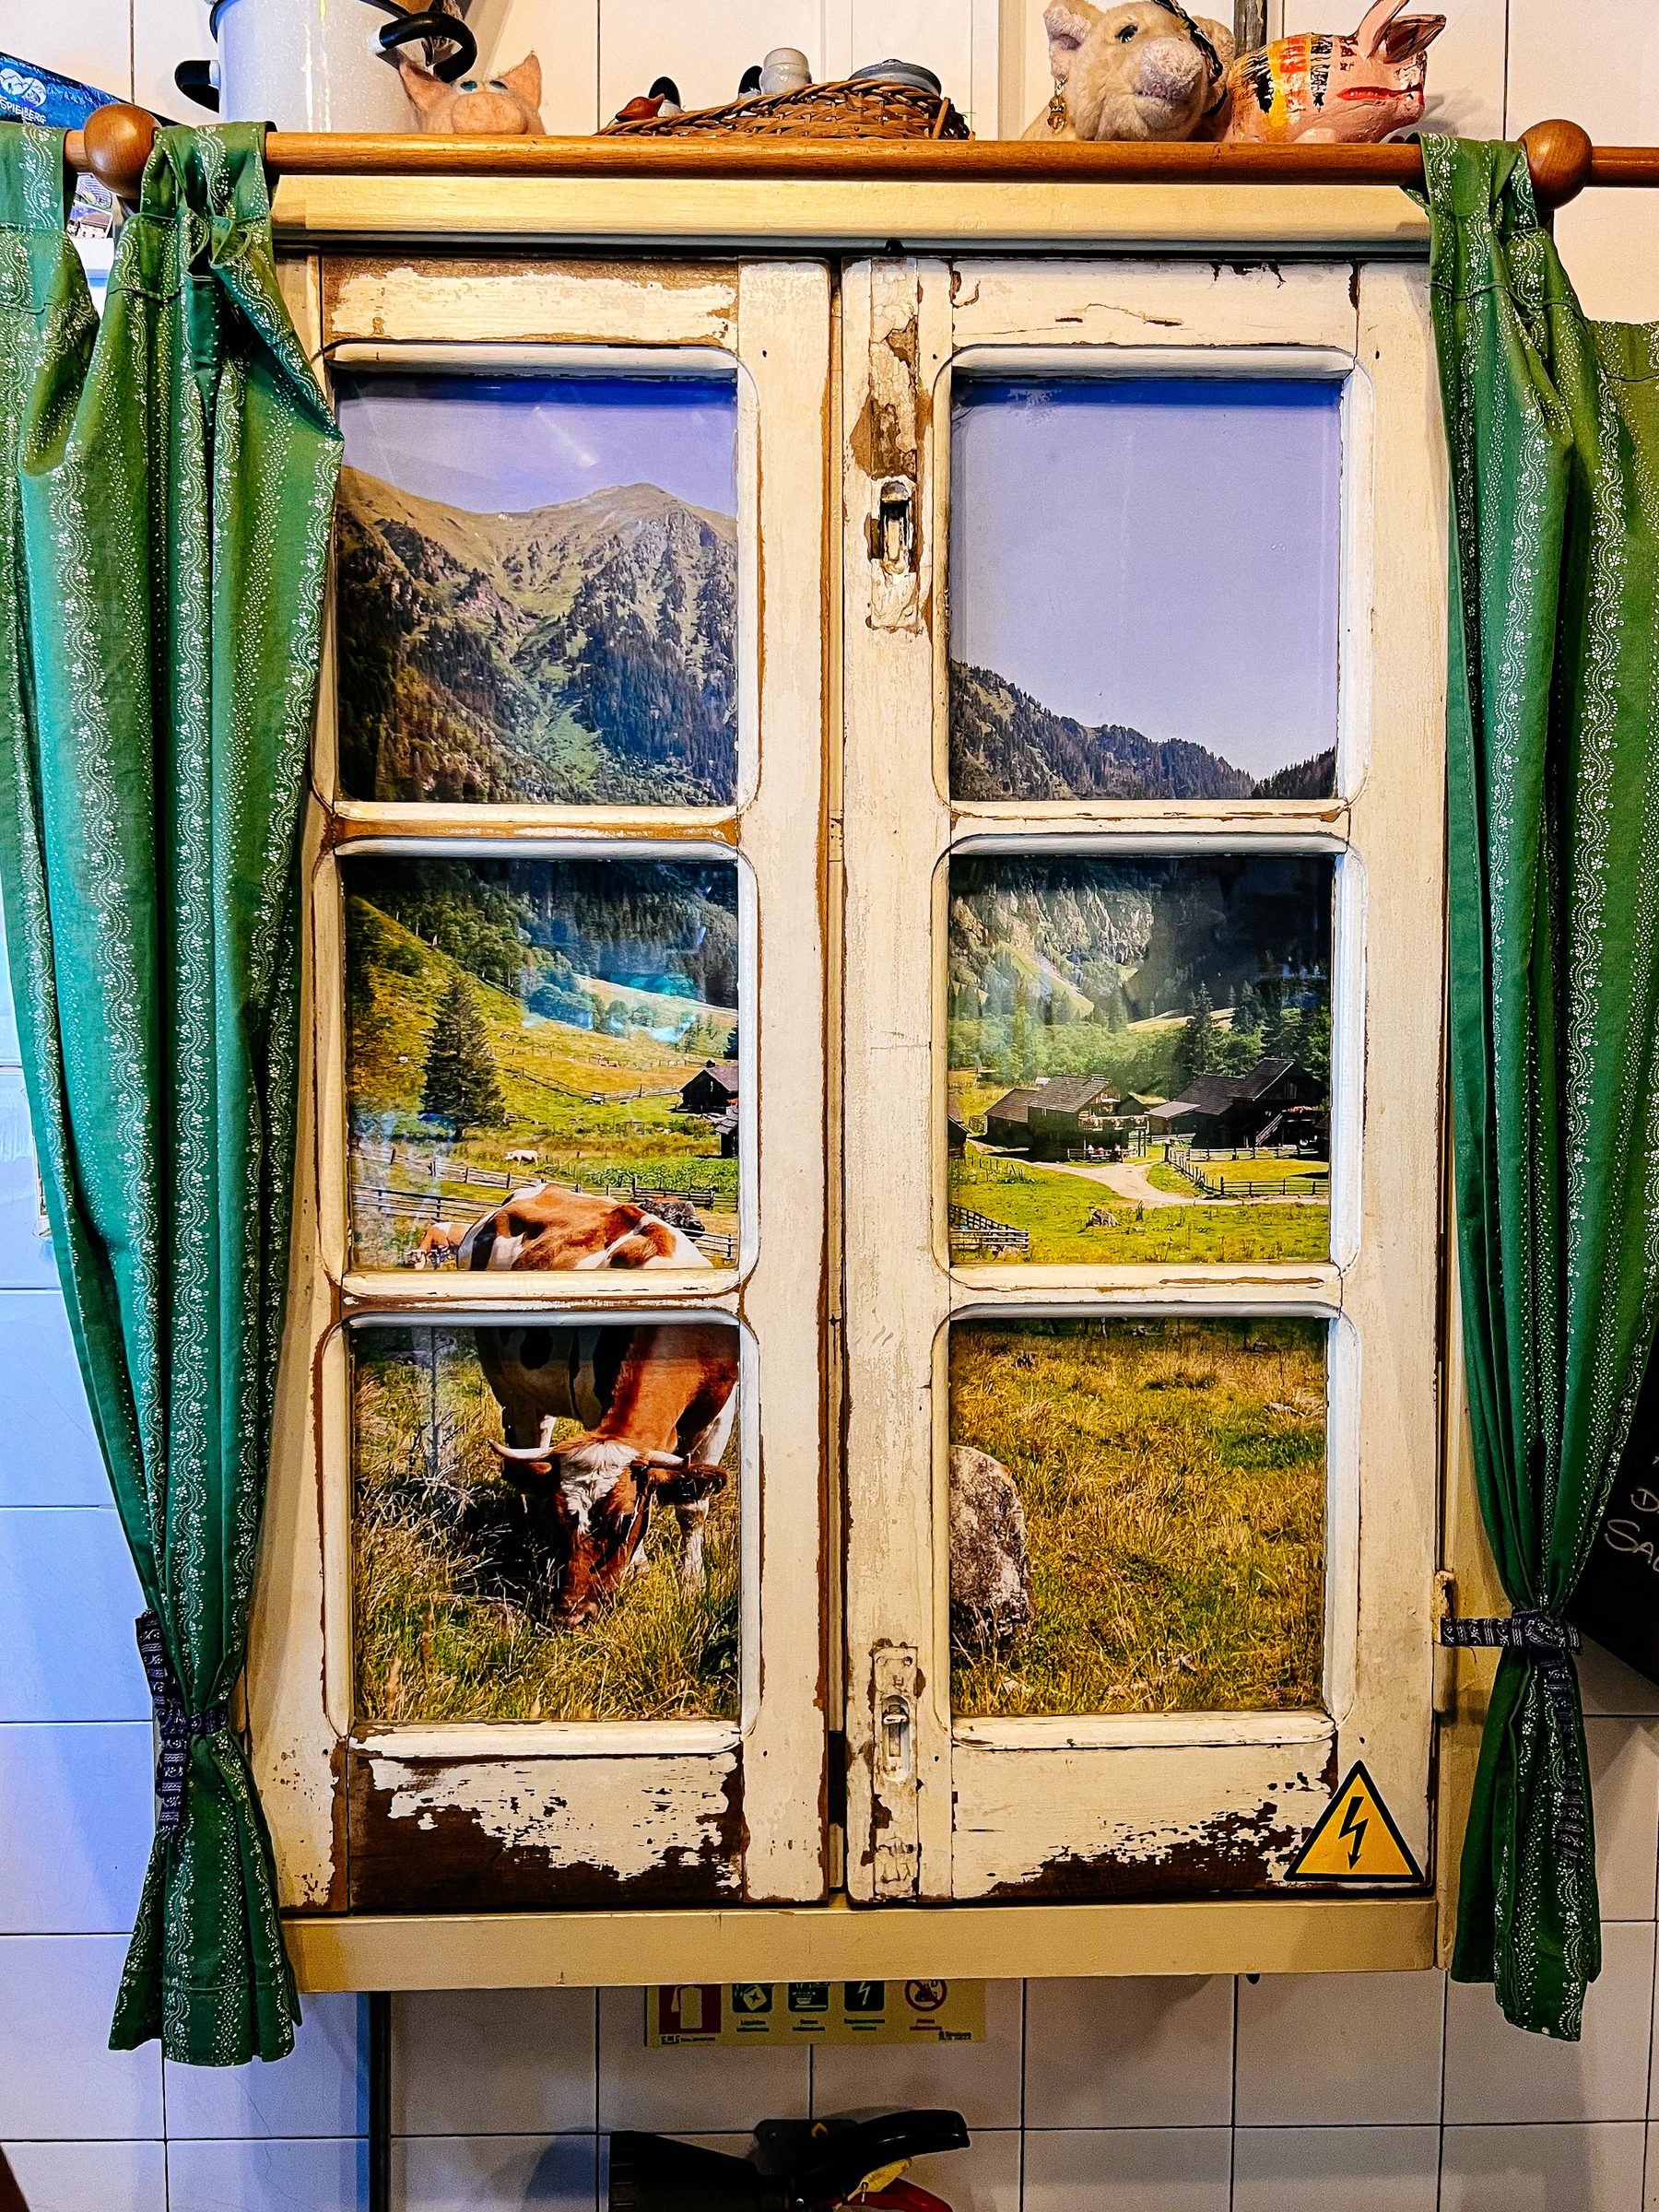 A wooden window, with a photo inside it.